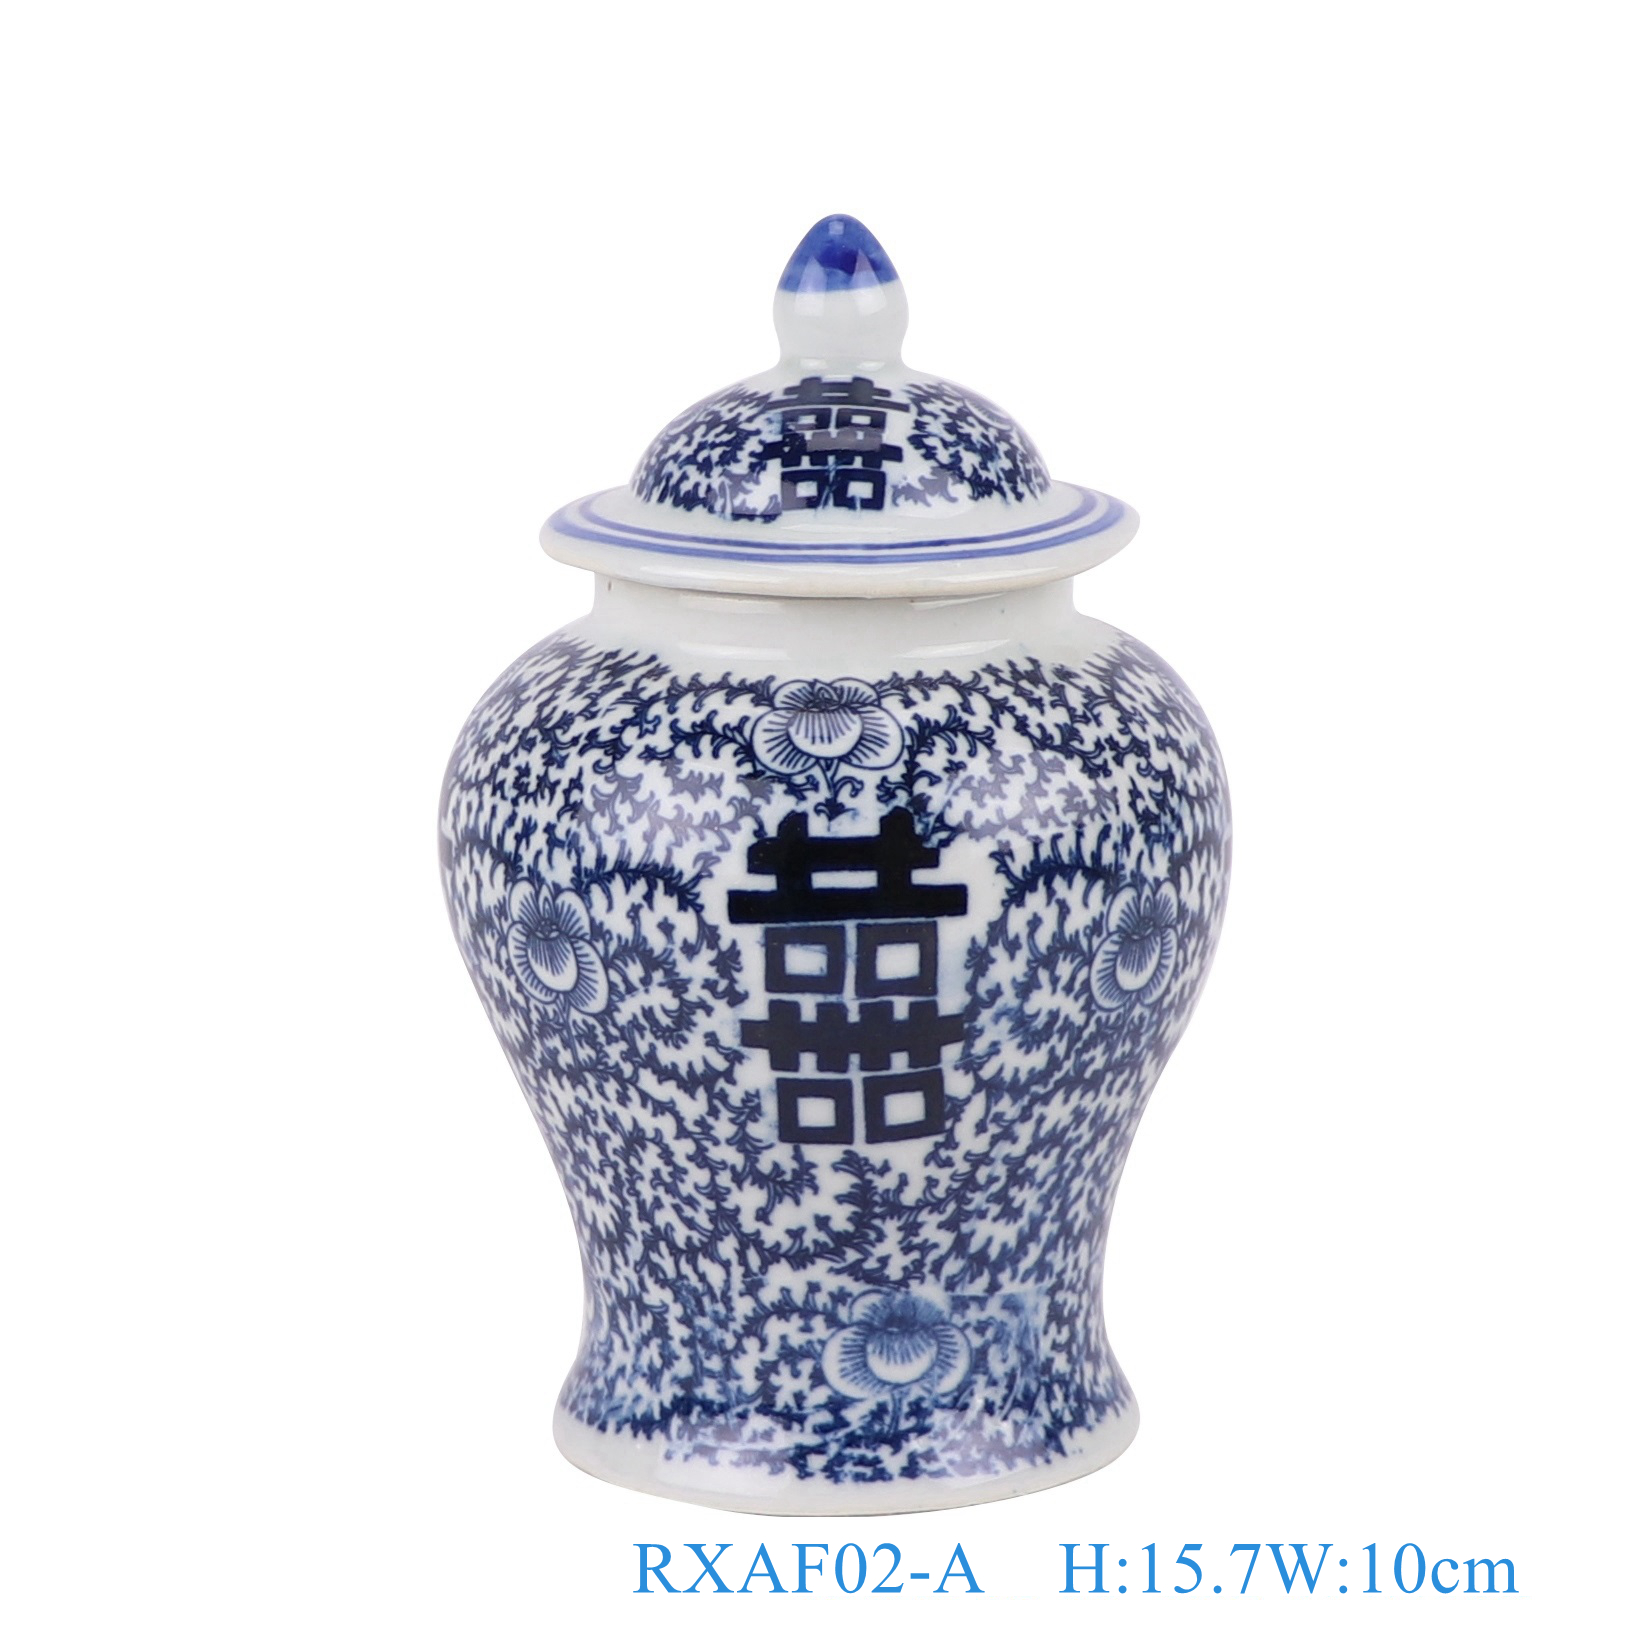 RXAF02-A-B-C-D Blue and white cost-efficient double happiness interlocking branches ceramic mini small jar